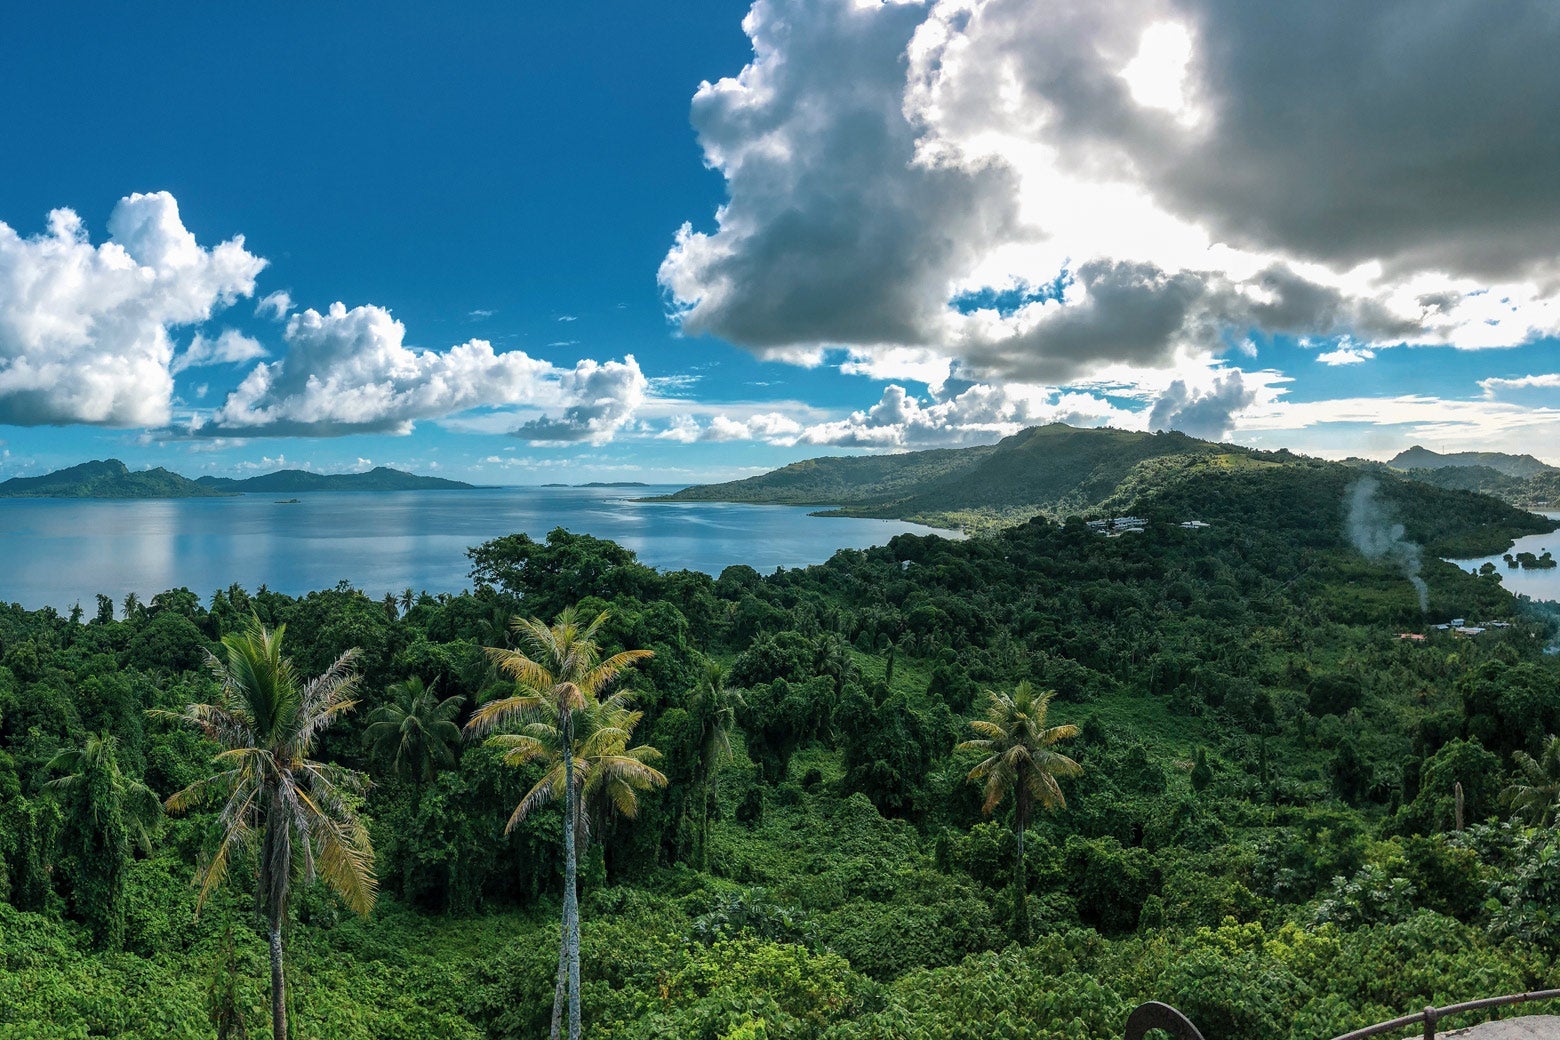 A landscape of lush forest, a lagoon, and a blue sky with white clouds.